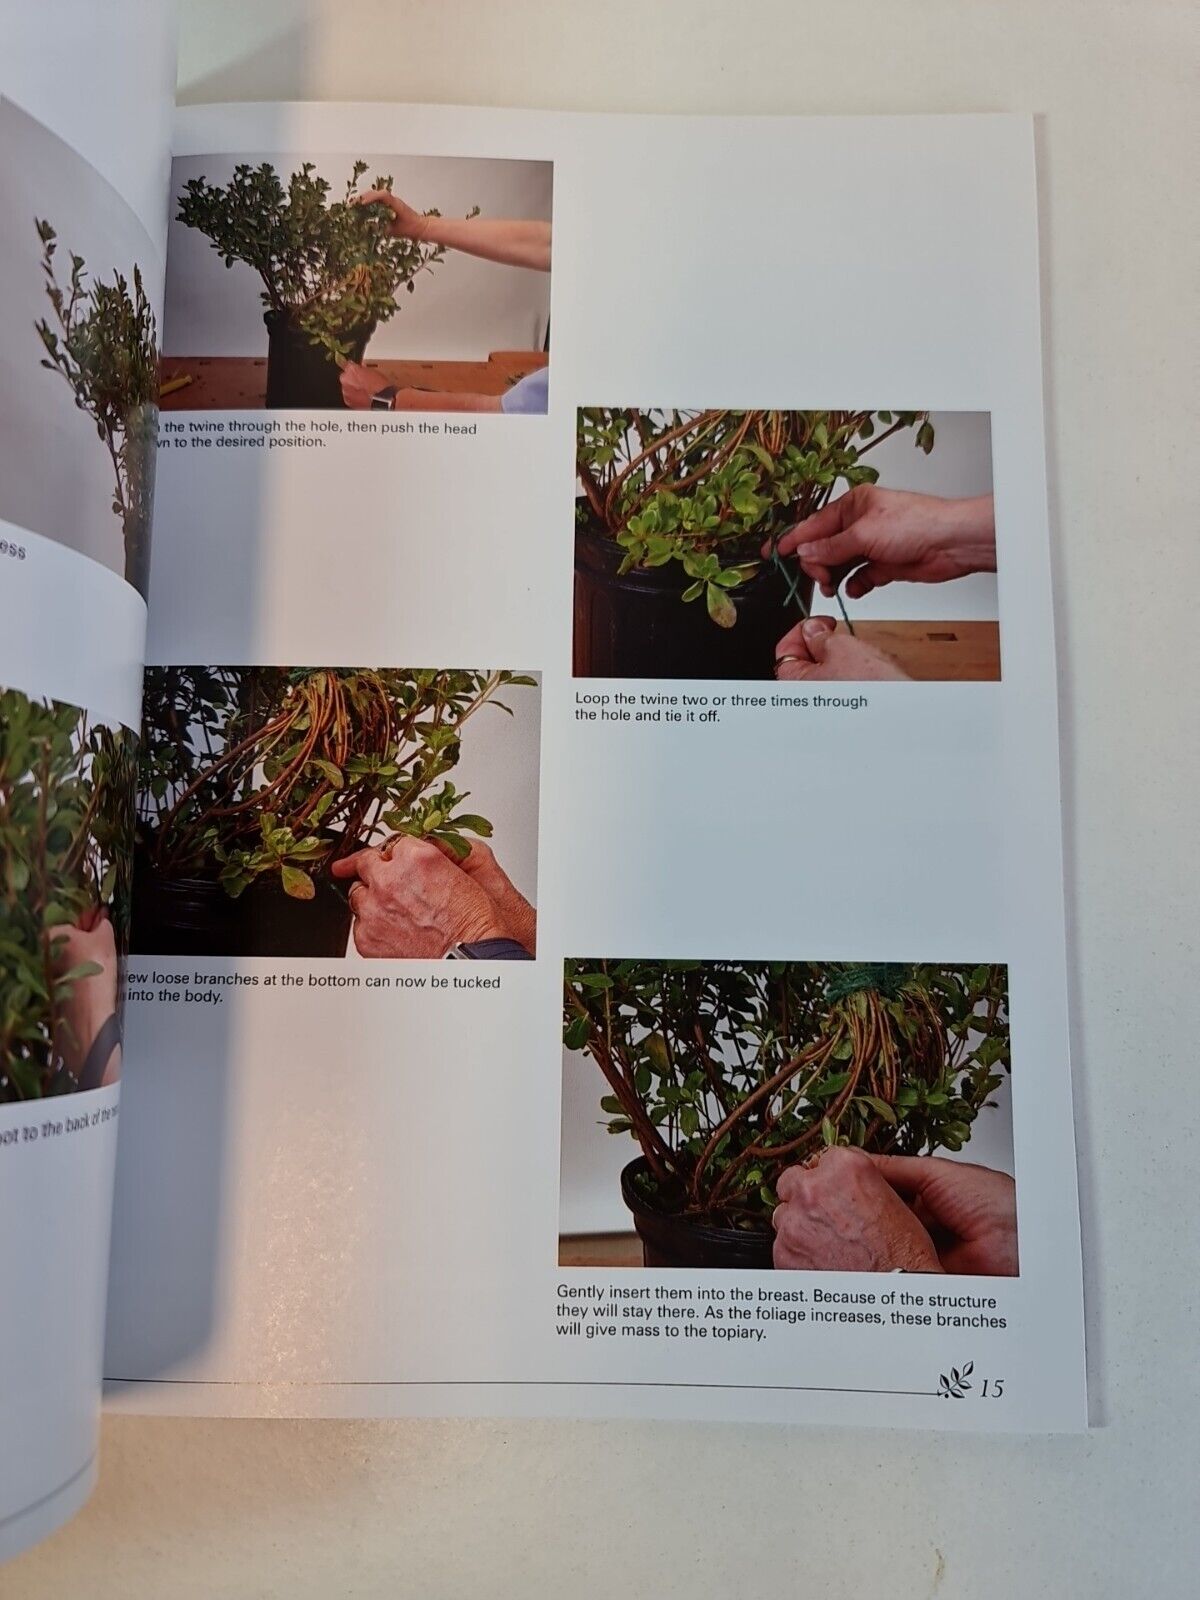 Basic Topiary: A Living Approach by Dean Myers (2010)